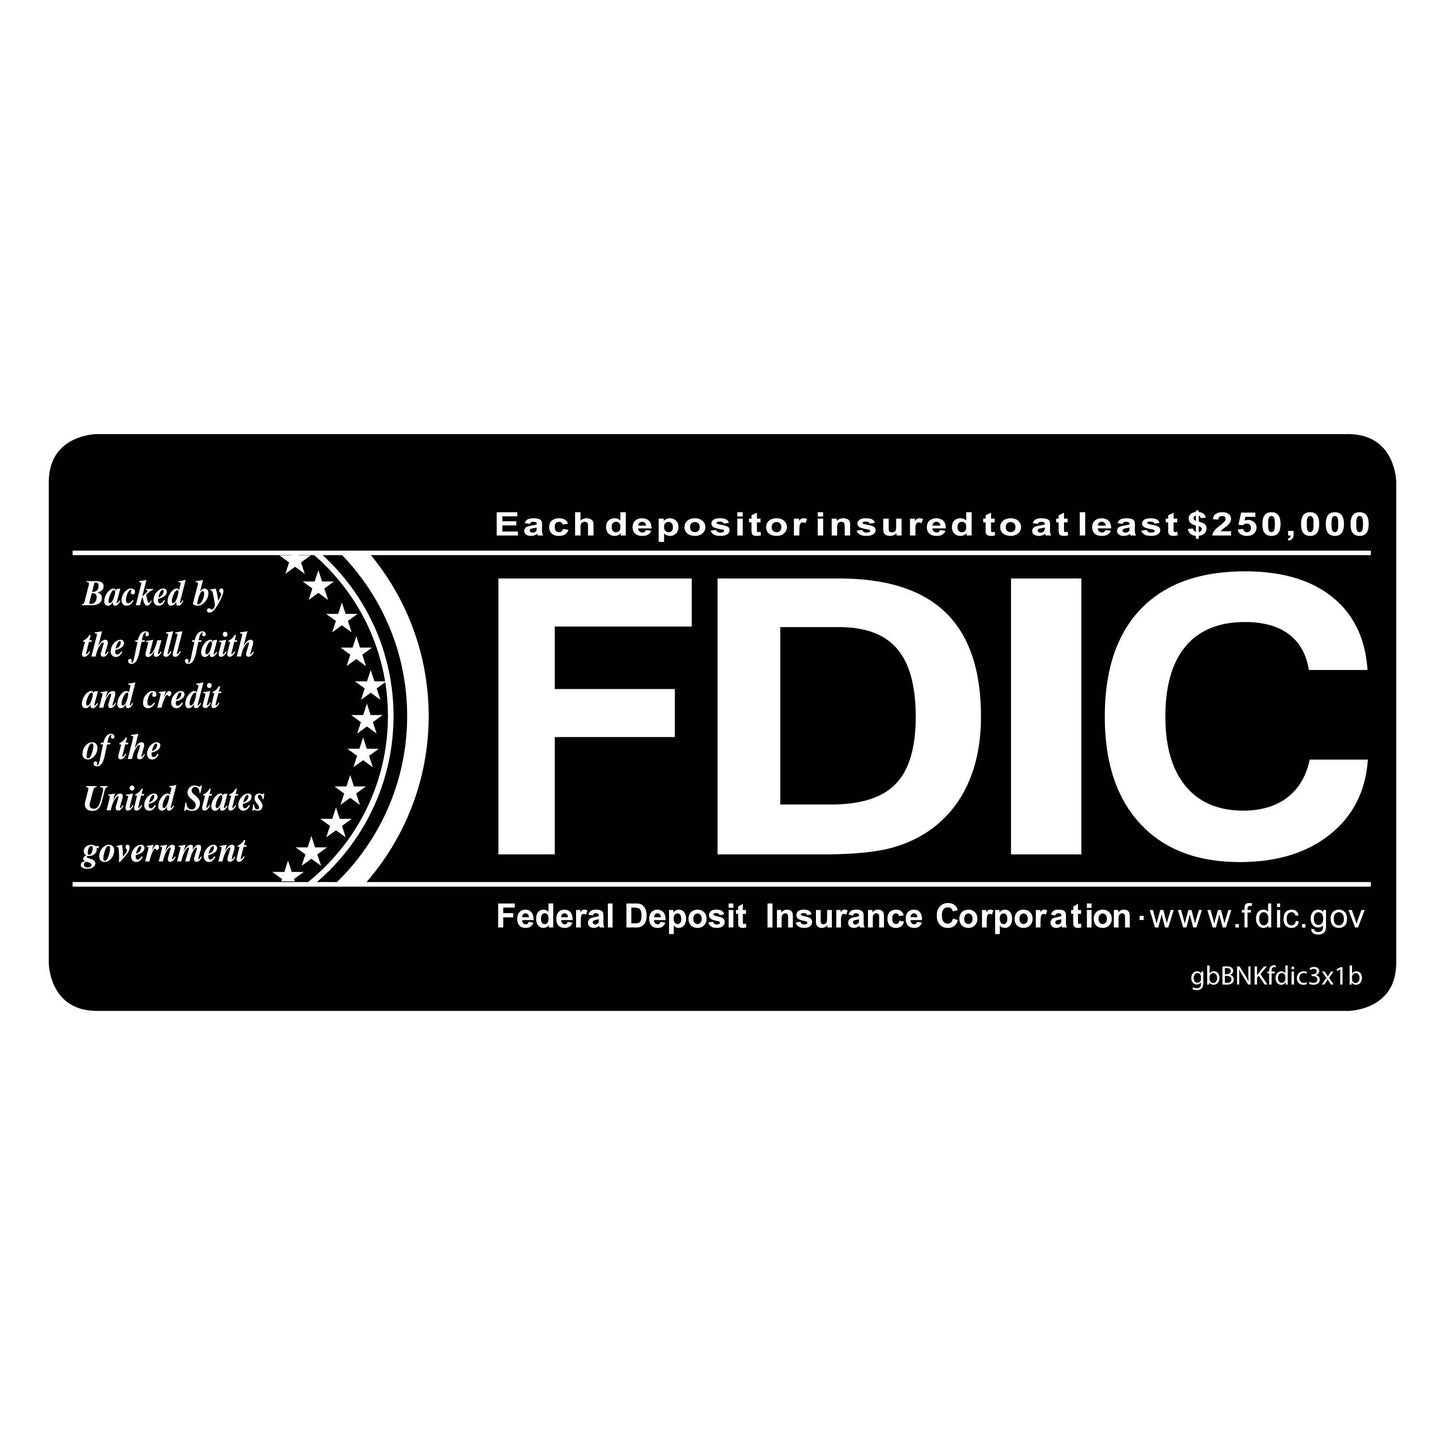 FDIC Black Background with White Lettering Decal. 3 inches by 1 inch in size.